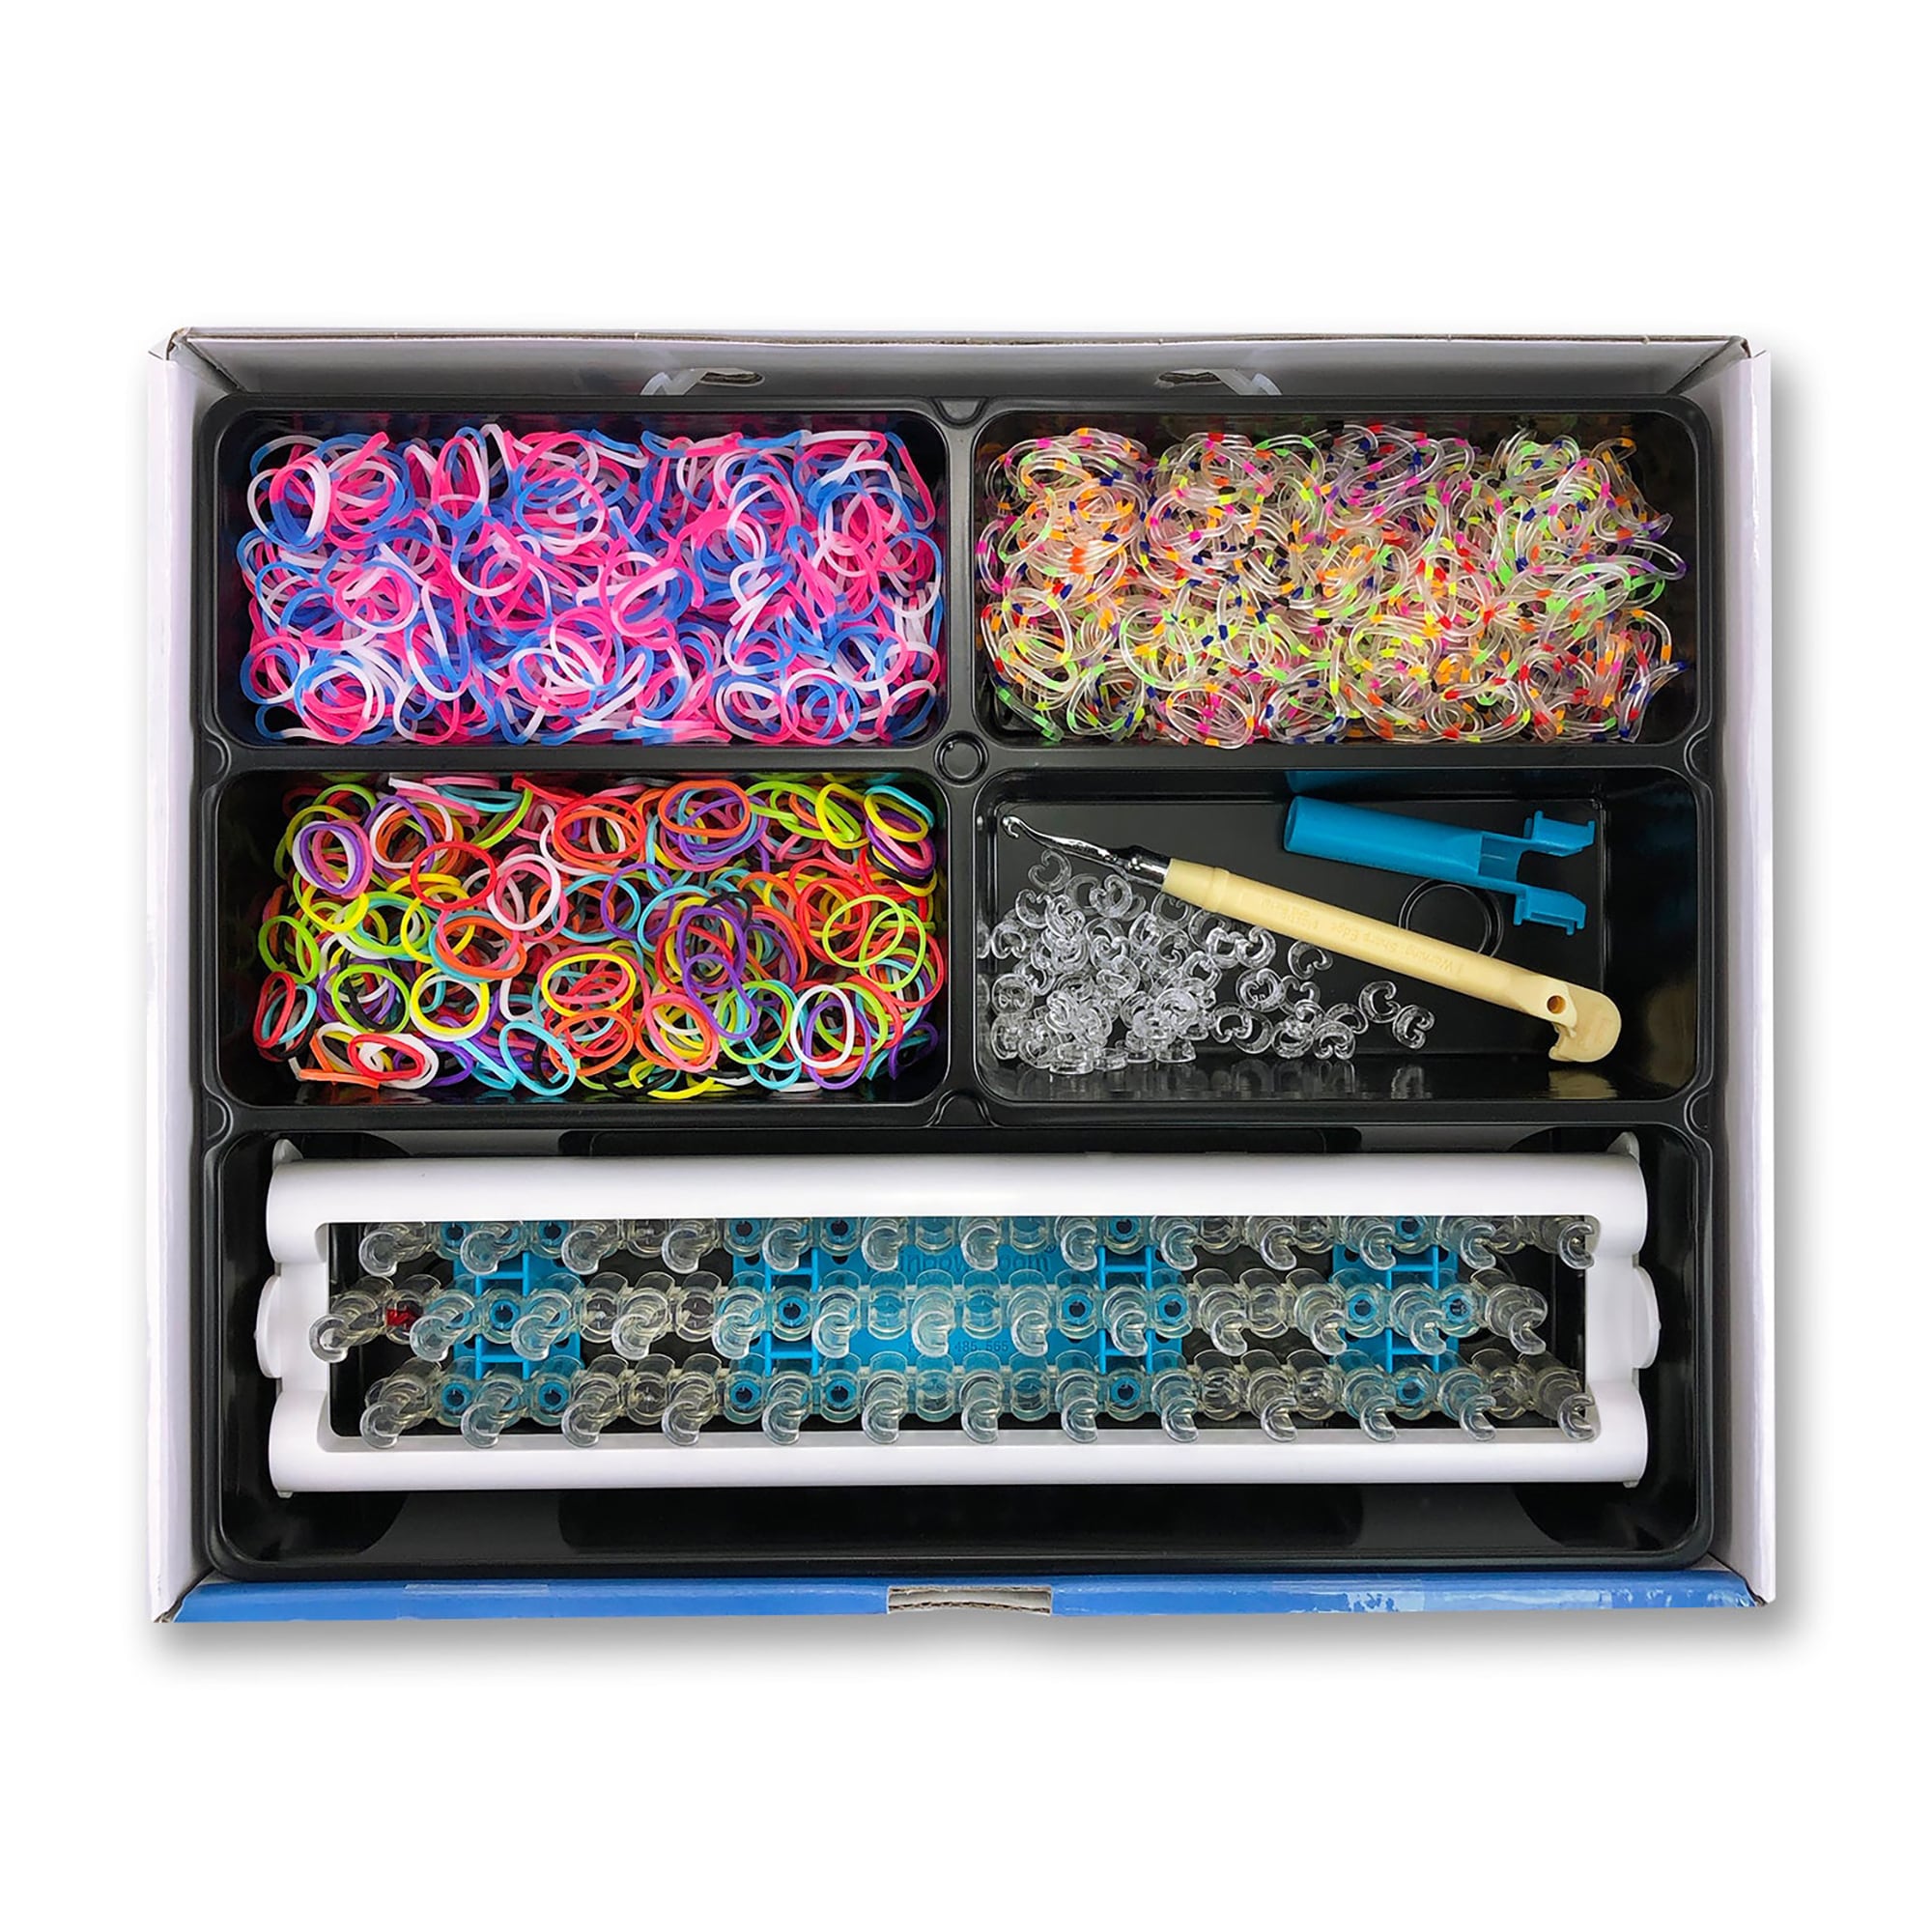 Rainbow Loom Creative Play Bracelet Craft Kit - Assorted Rubber Bands,  Metal Hook, C-Clips - Promotes Creativity - Ages 3+ in the Kids Play Toys  department at